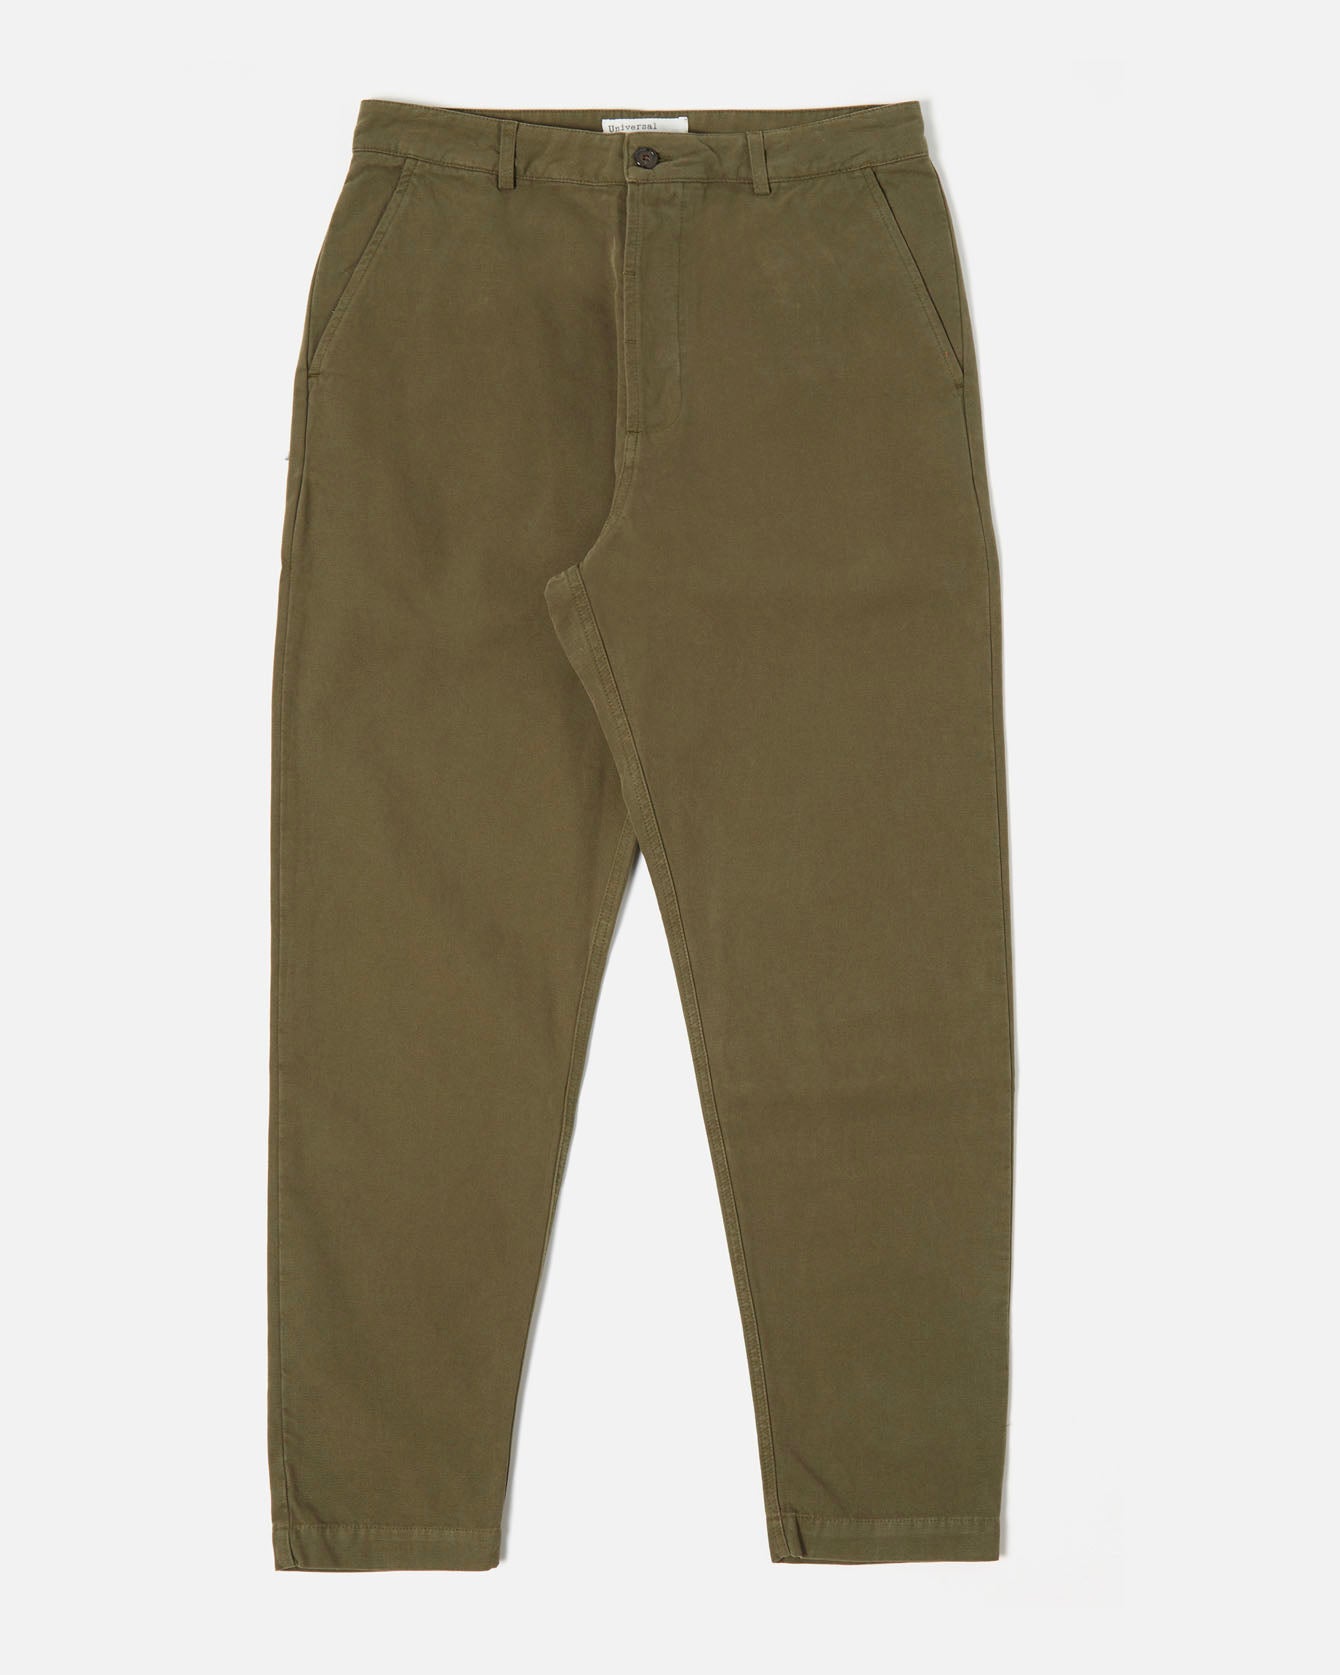 Military Chino Canvas Olive